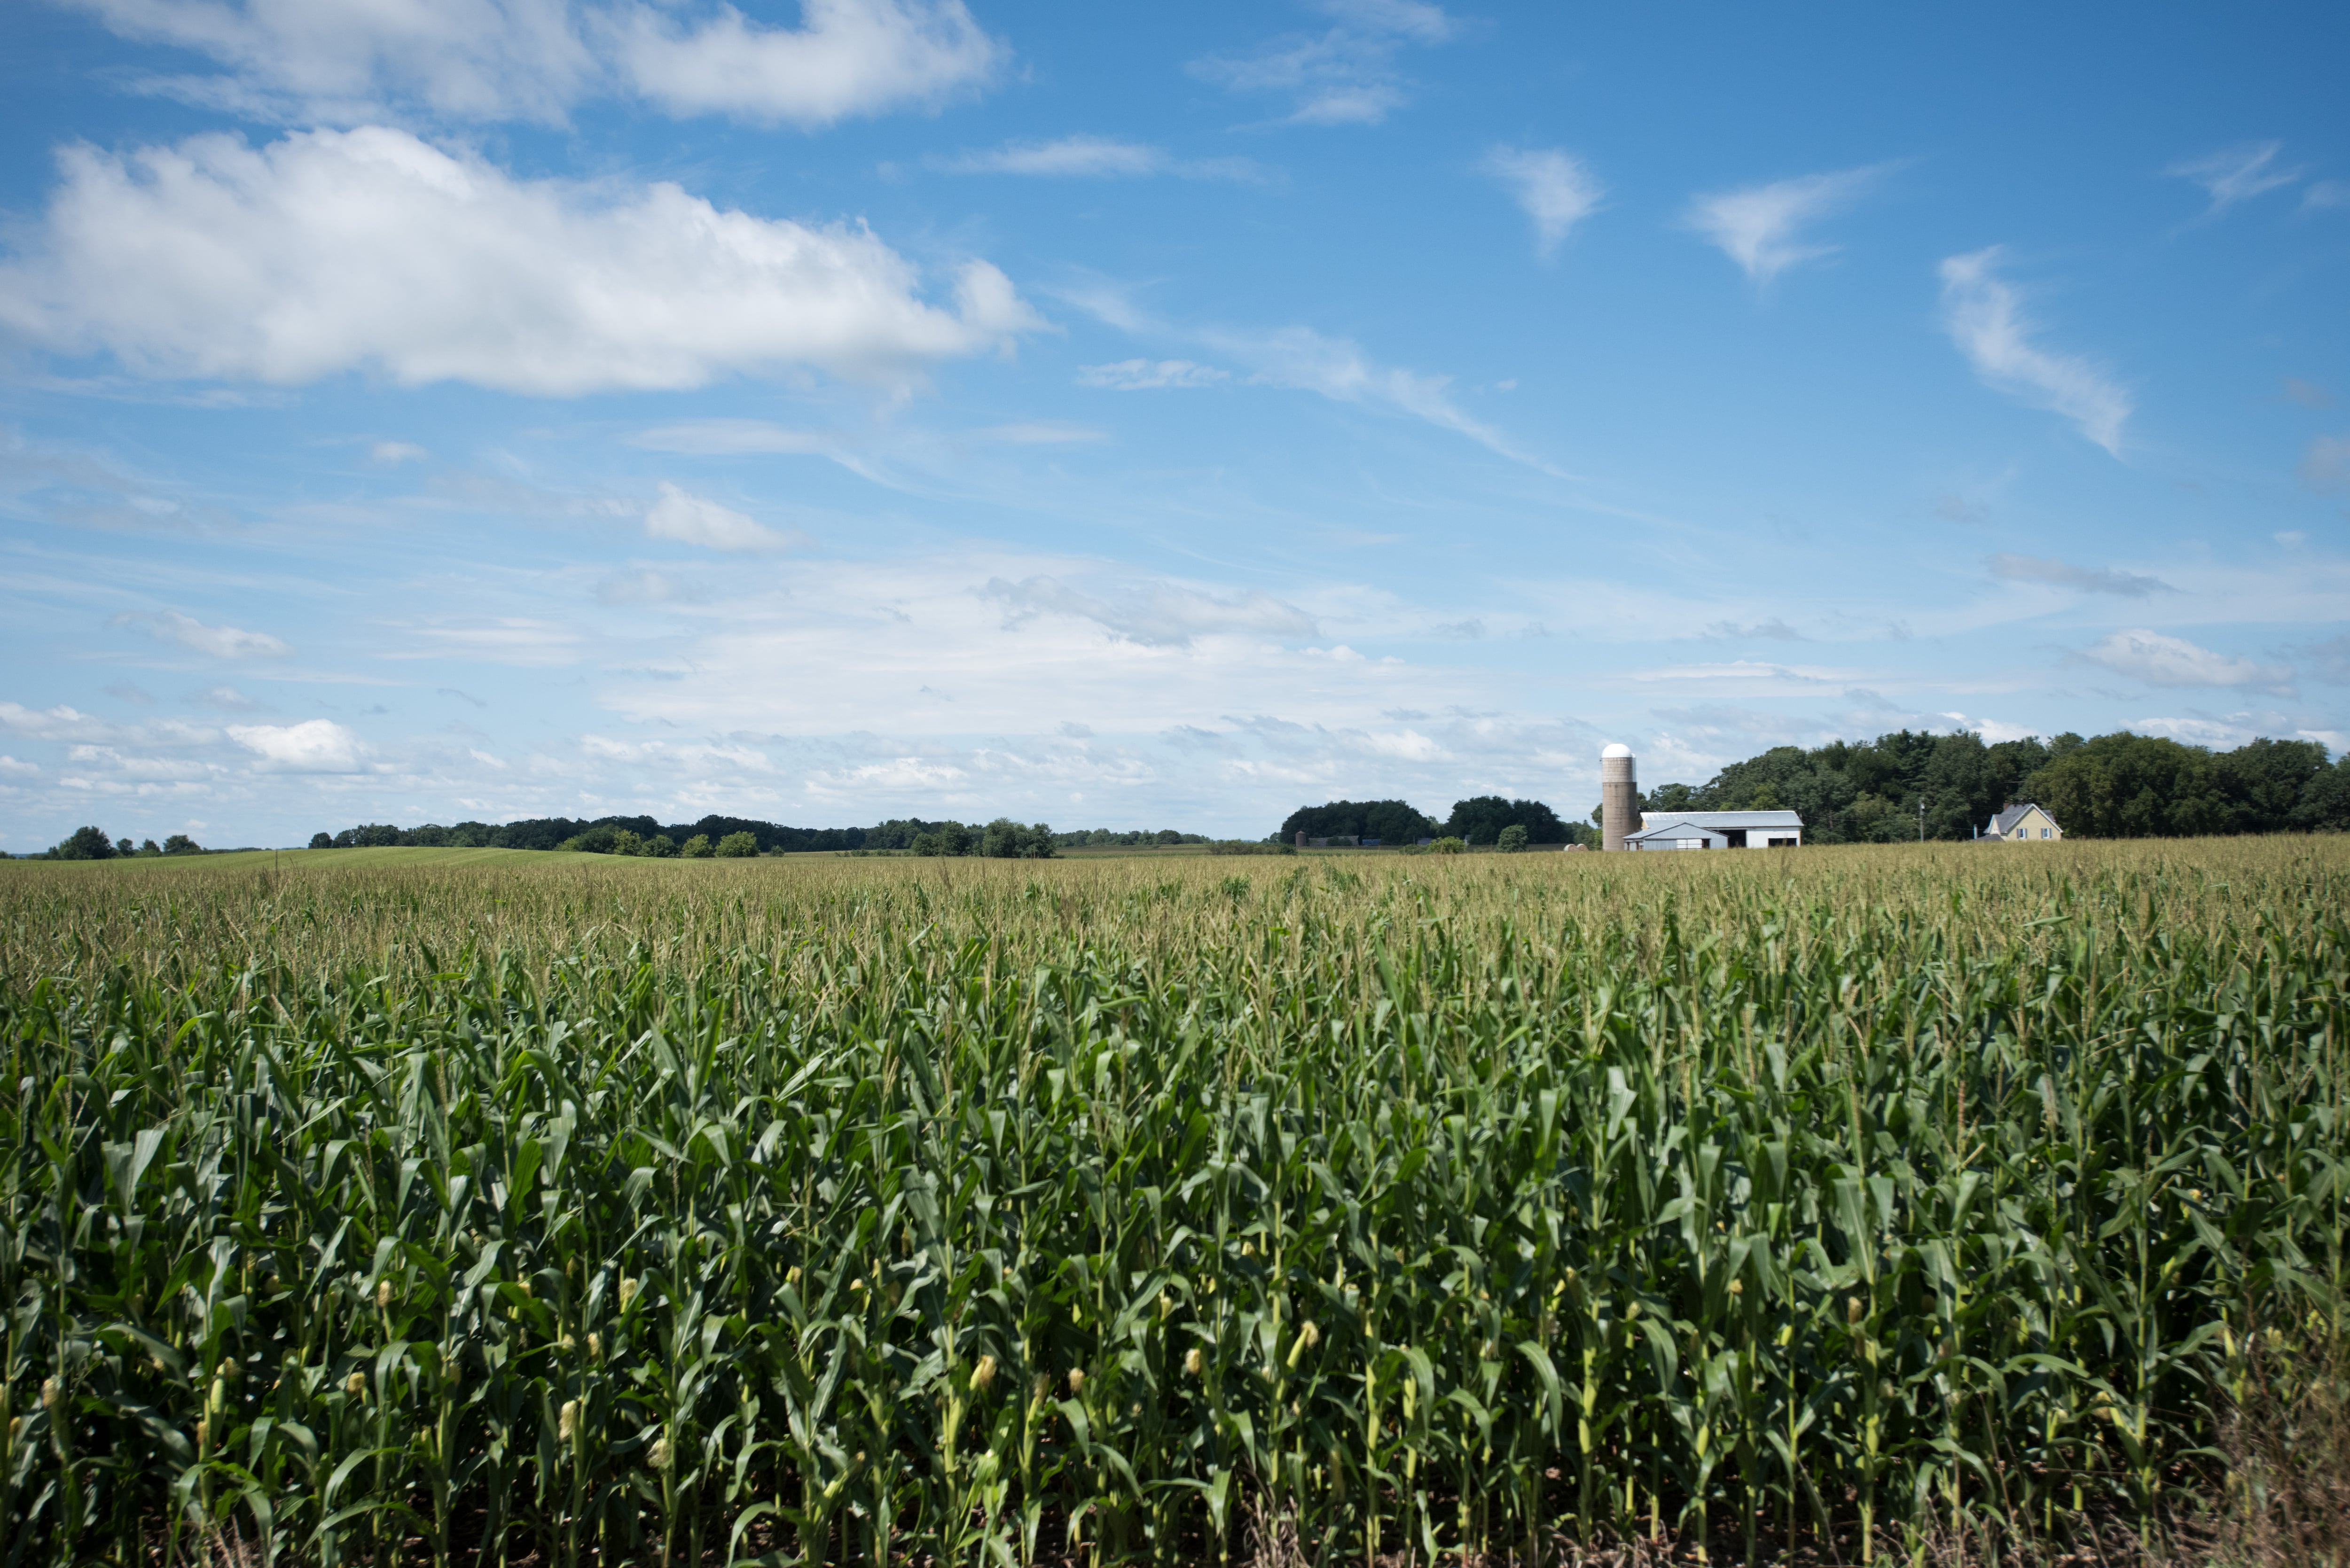 Indiana sees reduction in farmland acres